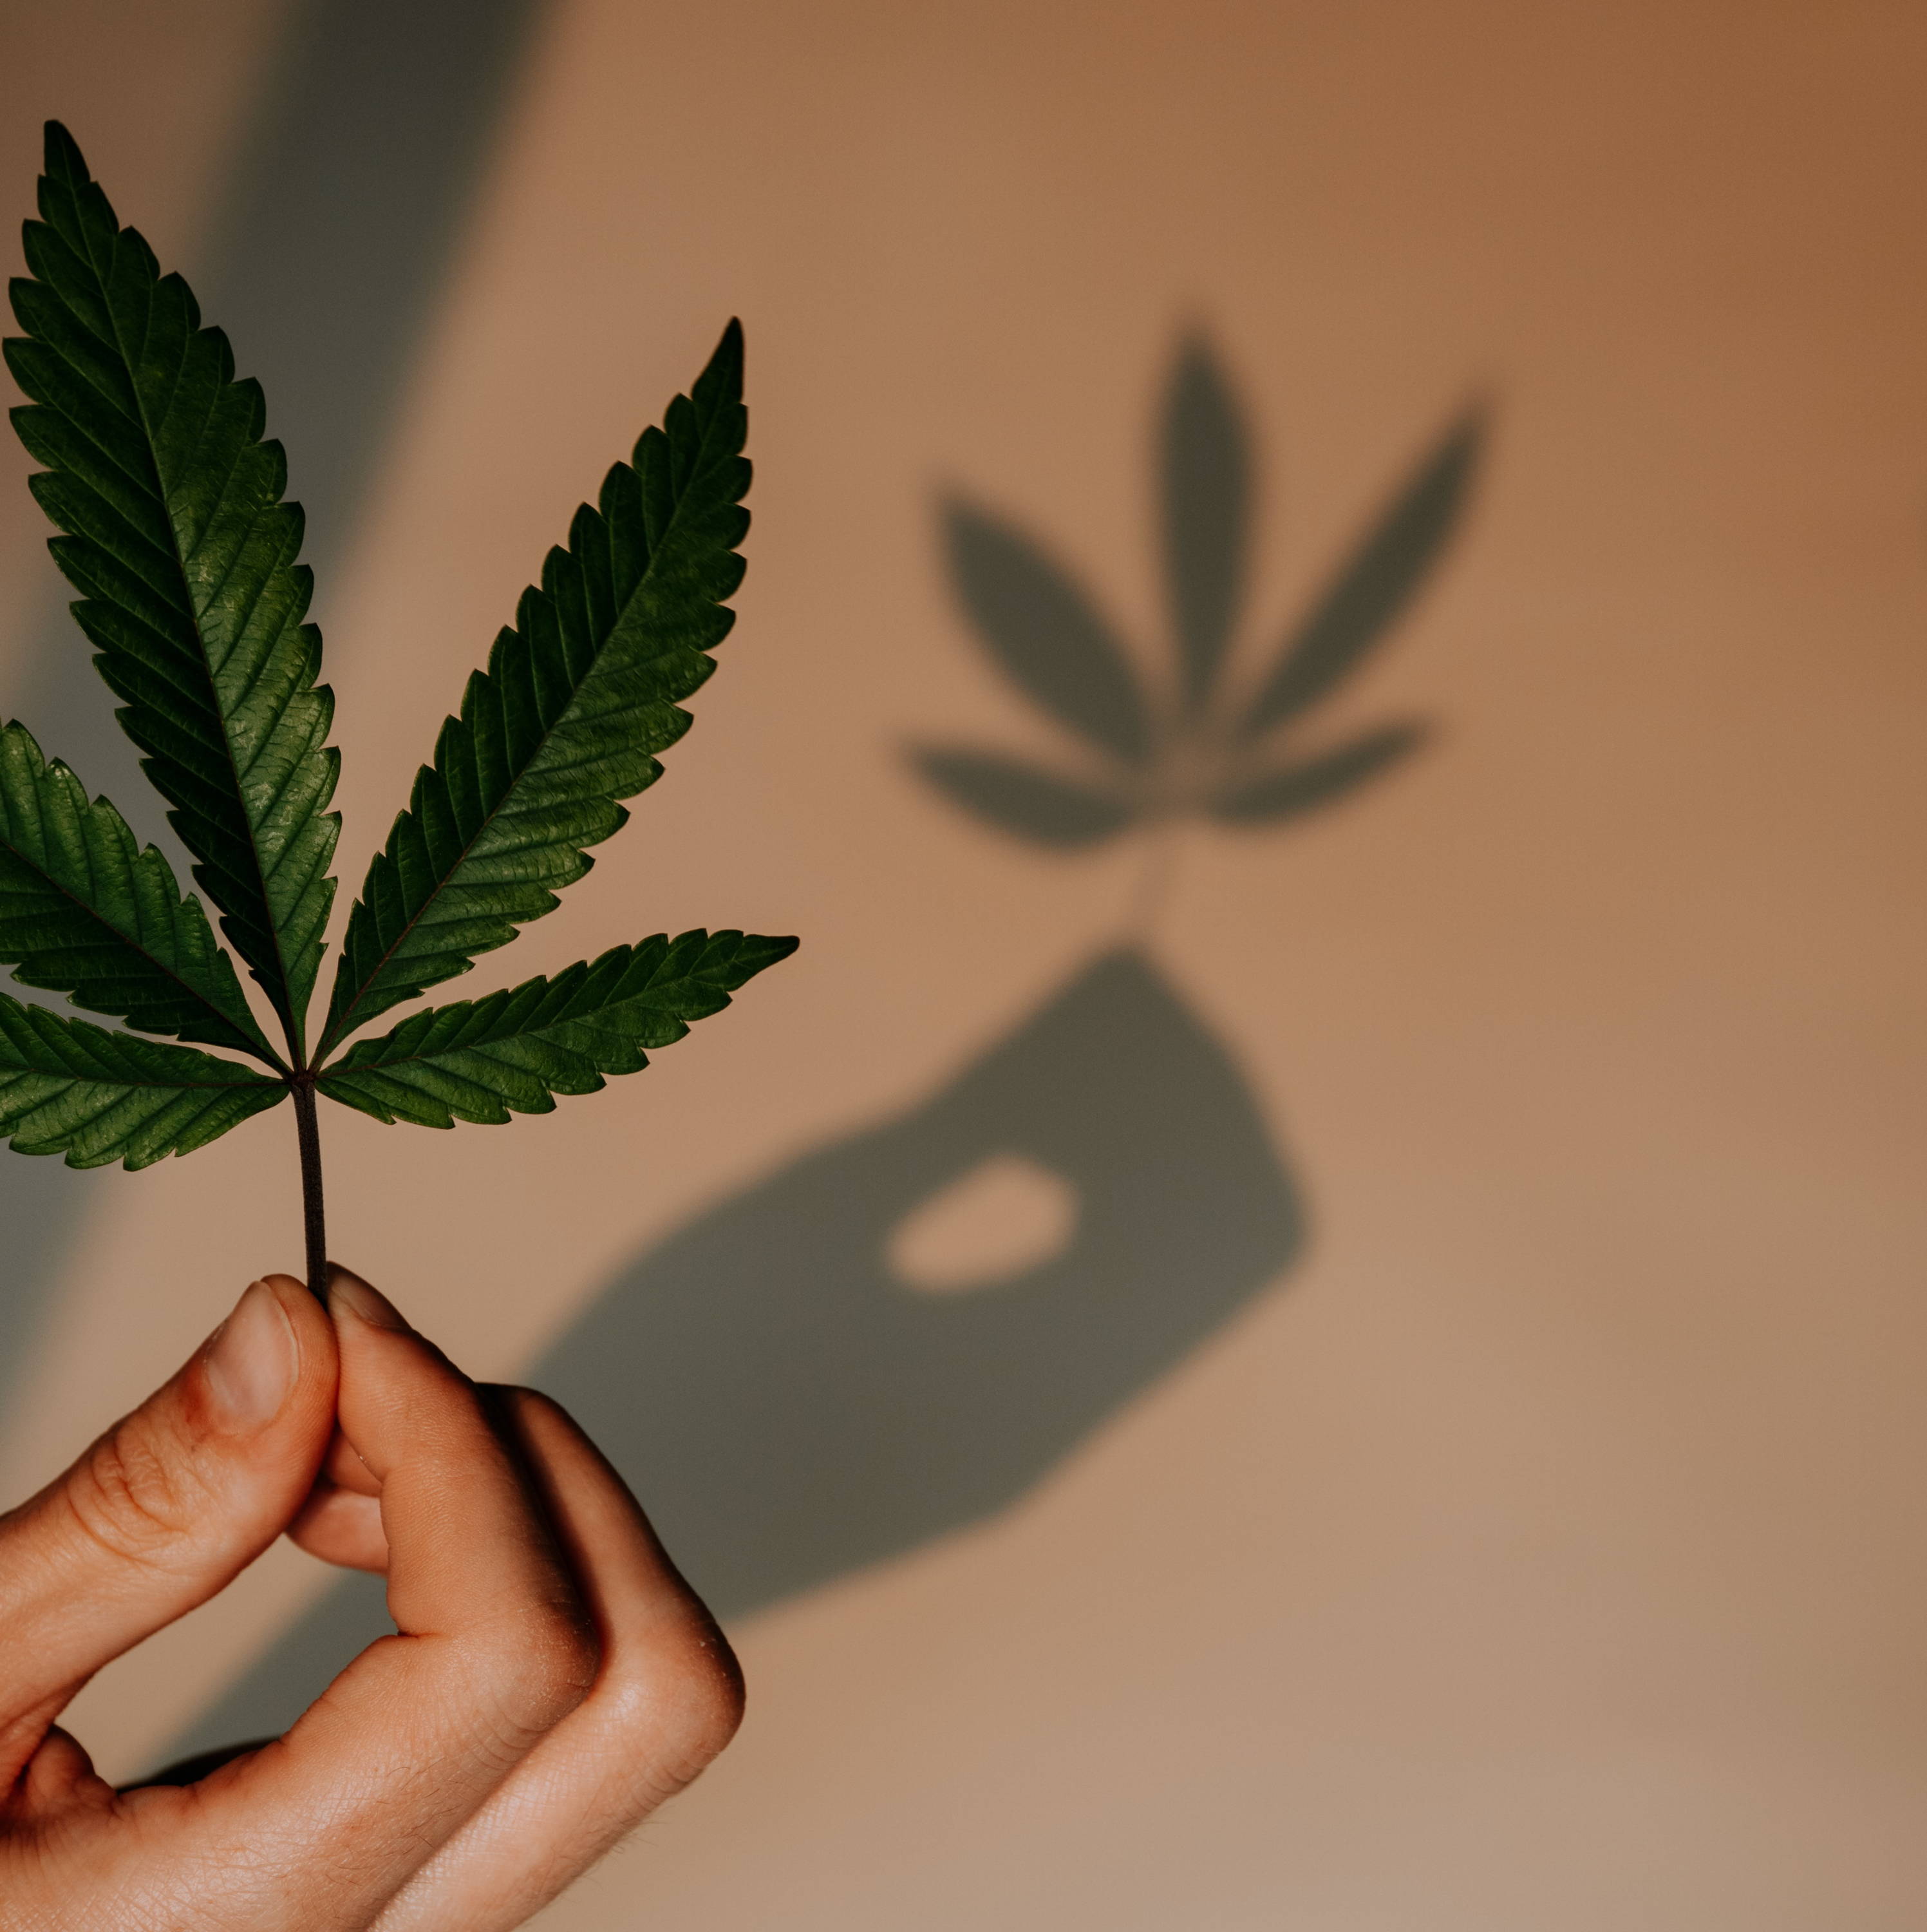 A large cannabis leaf is front and center. The leaf is held by a single hand, and casts a shadow against a light background